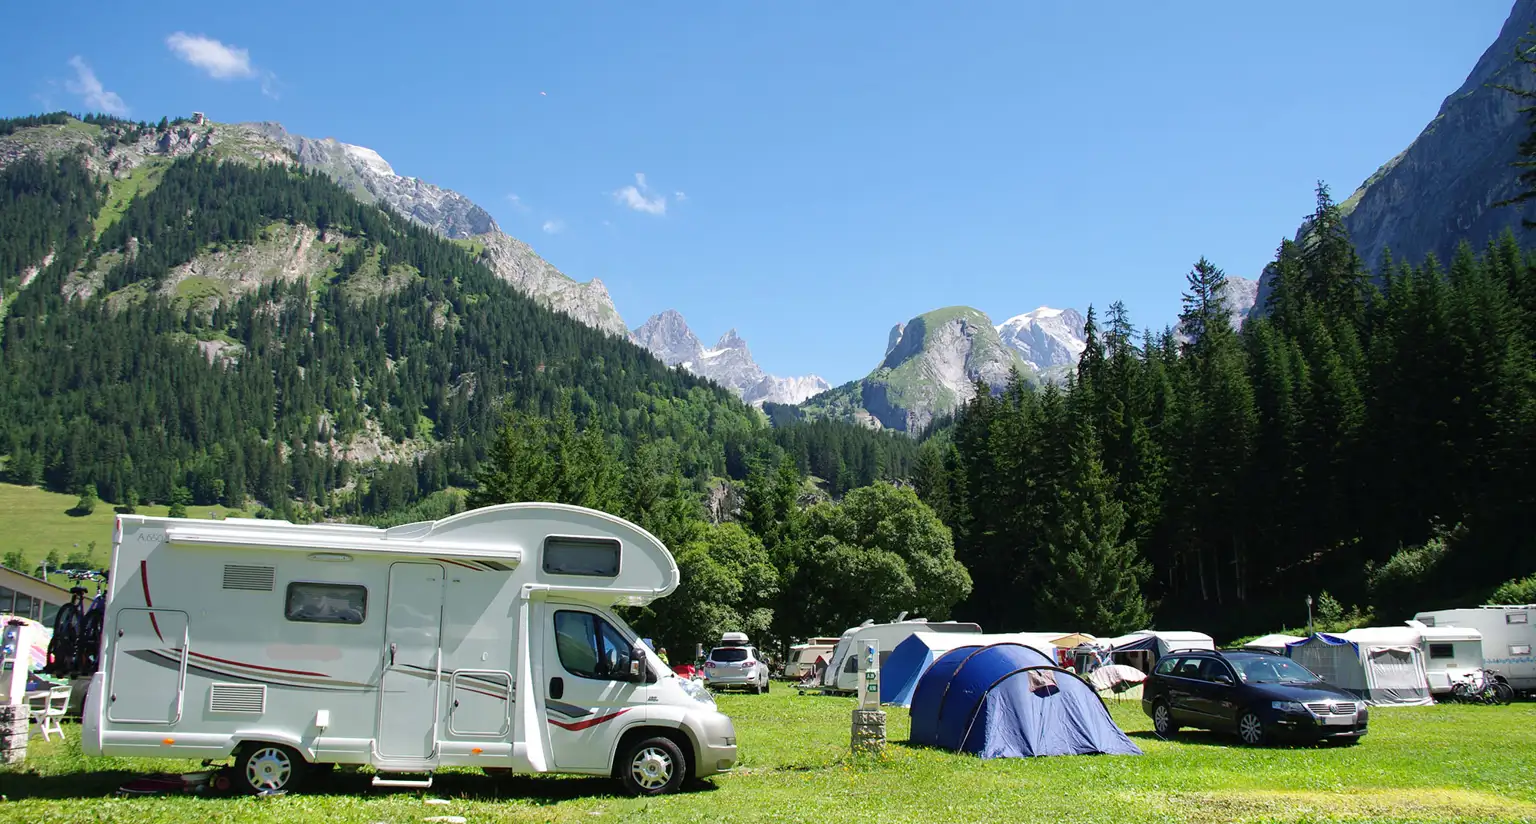 Camping in France